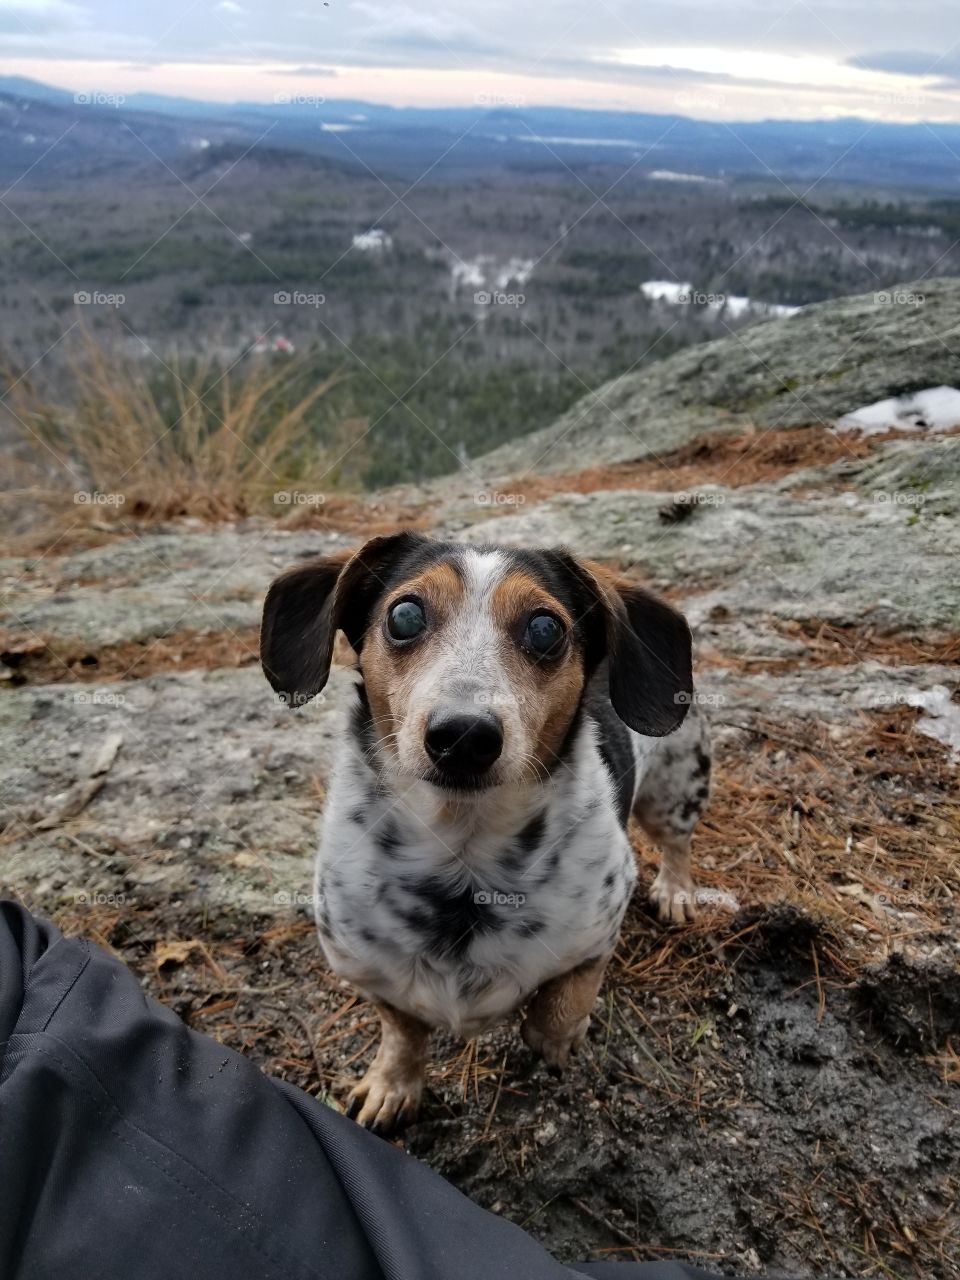 little dogs can hike too